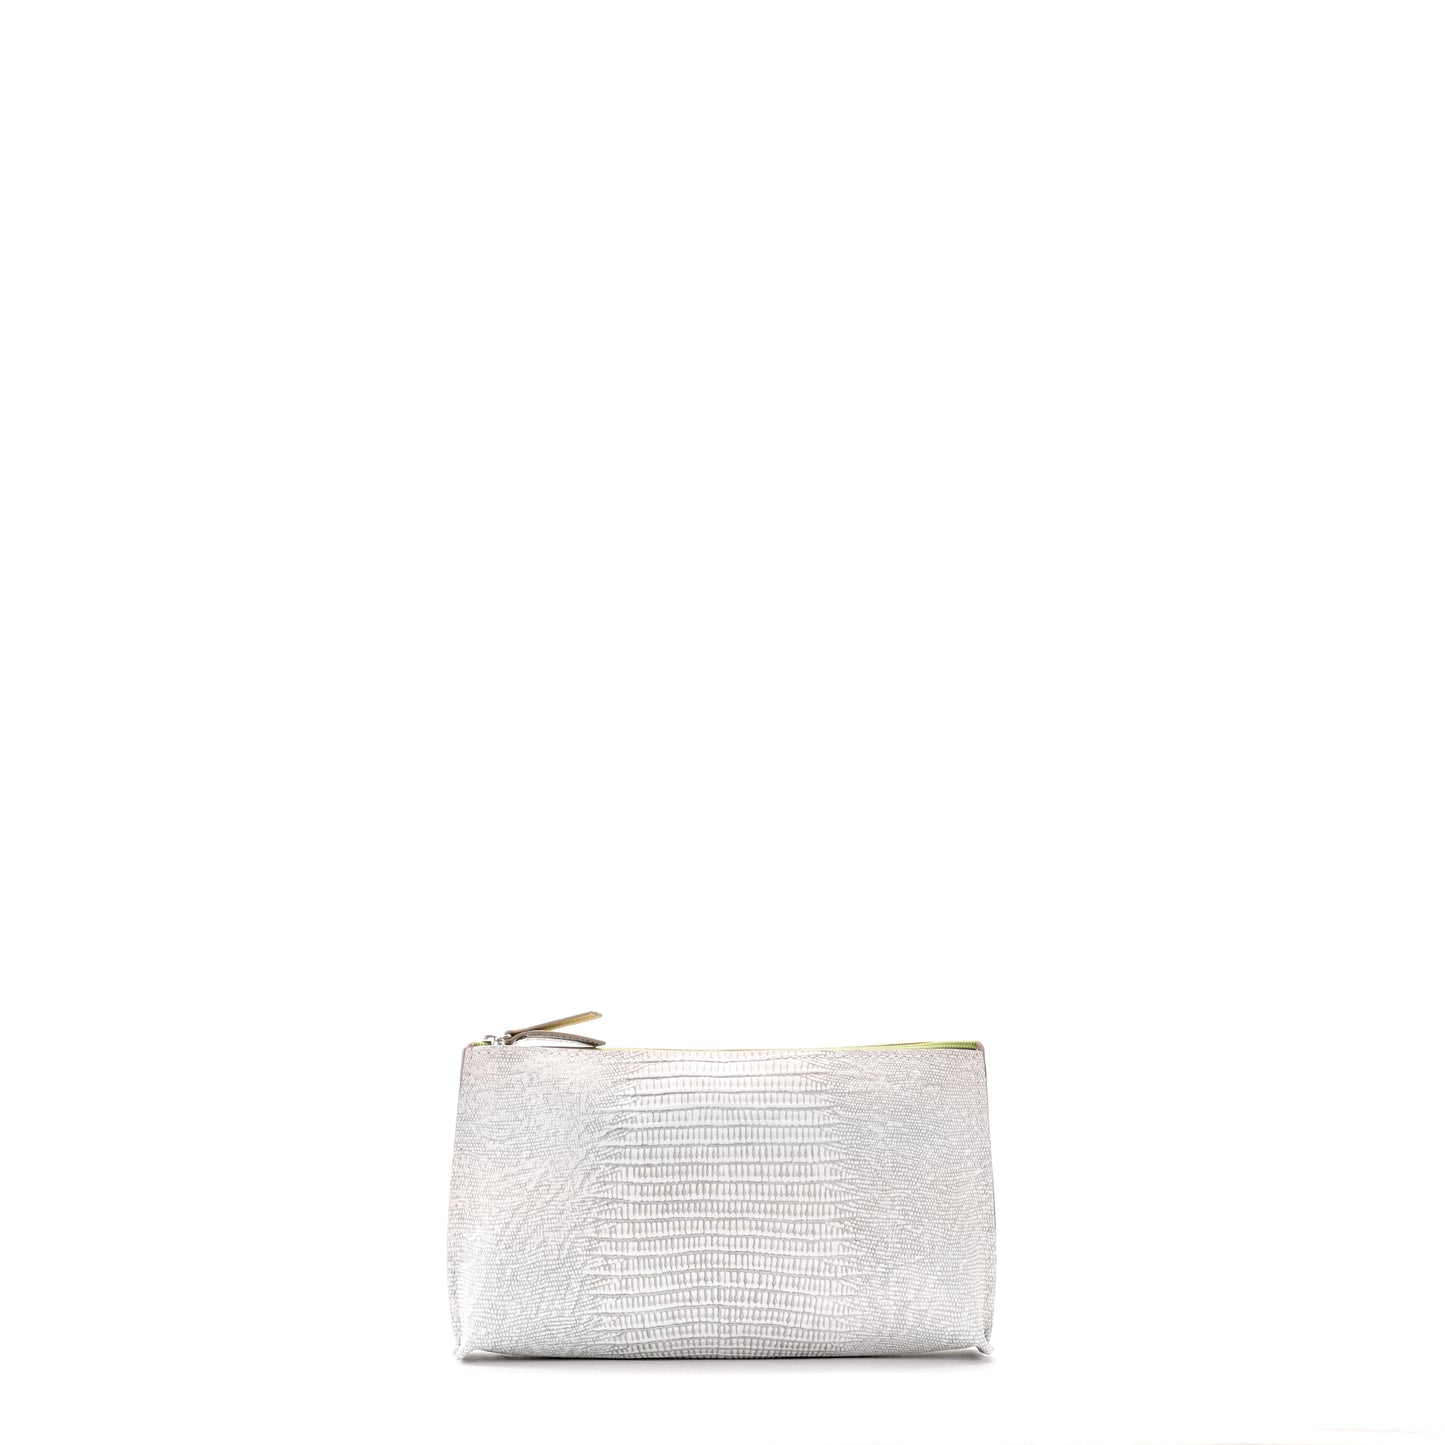 ESSENTIAL POUCH ANTIQUE WHITE EMBOSSED LIZARD